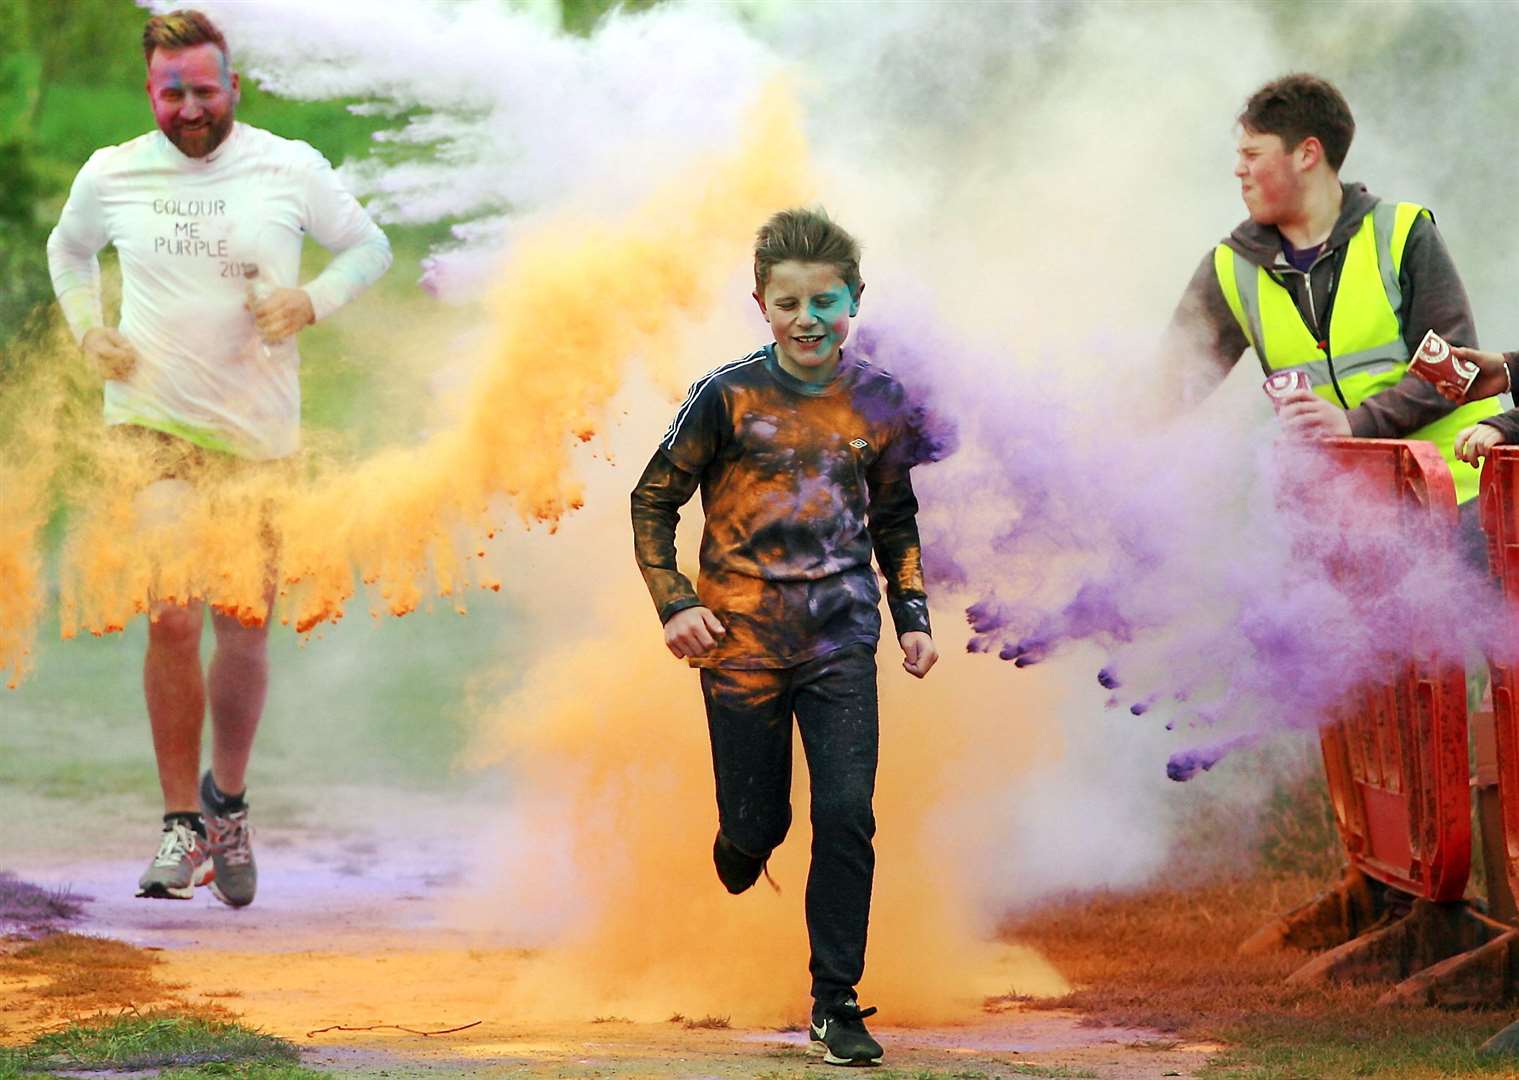 The Colour Run for Wisdom Hospice has been rearranged for October but charity boss Martyn Reeves fears it will still not go ahead